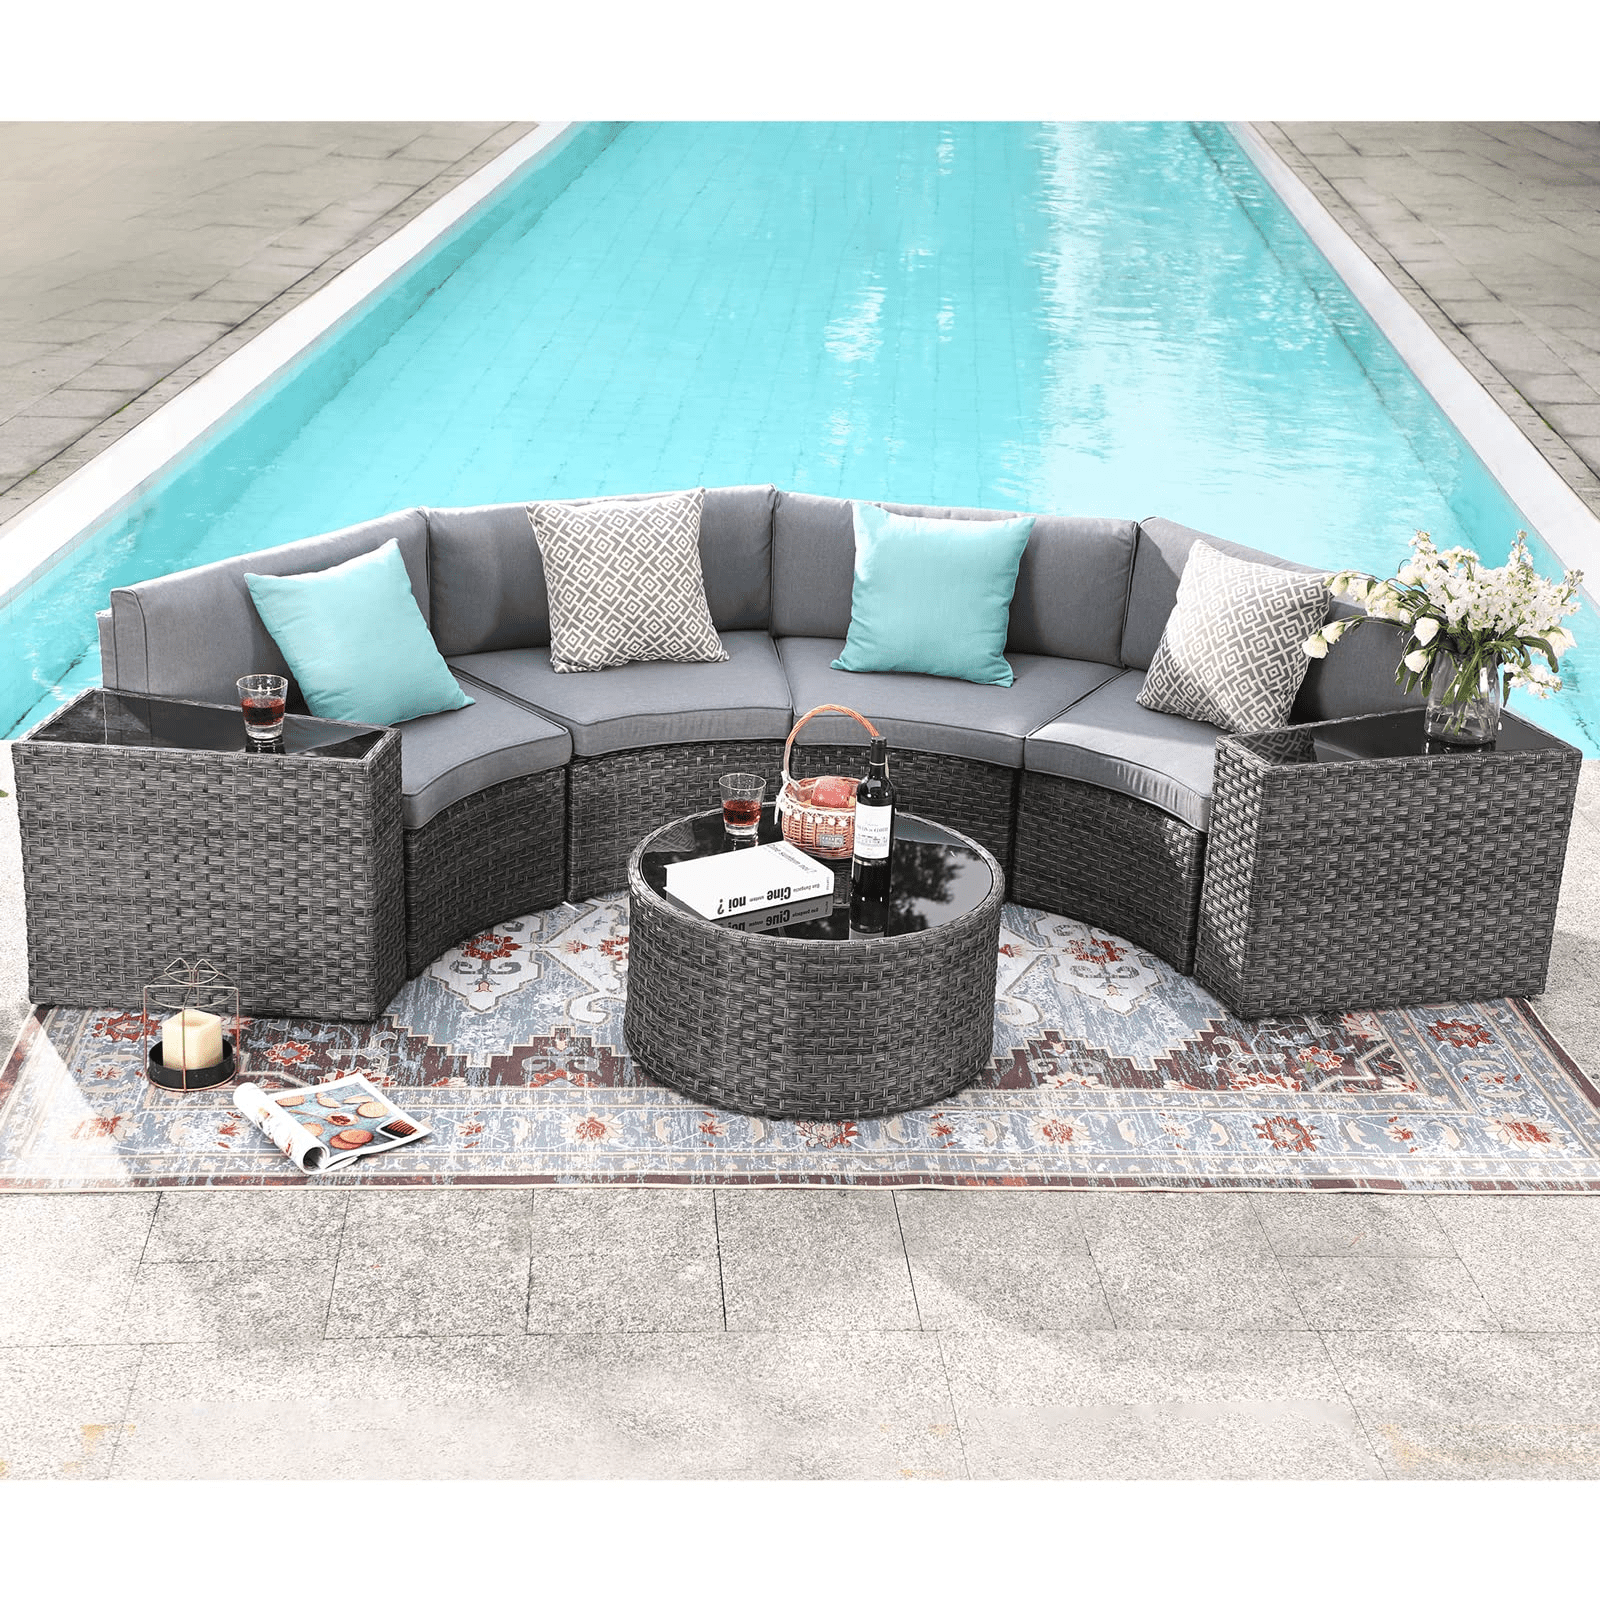 Outdoor Patio Furniture Set, Outdoor Sectional Half Moon Curved Sofa, Round  Coffee Table, 4 Pillows & Waterproof Cover, Taupe Cushion, 7 Piece –  Walmart Regarding Outdoor Half Round Coffee Tables (View 2 of 15)